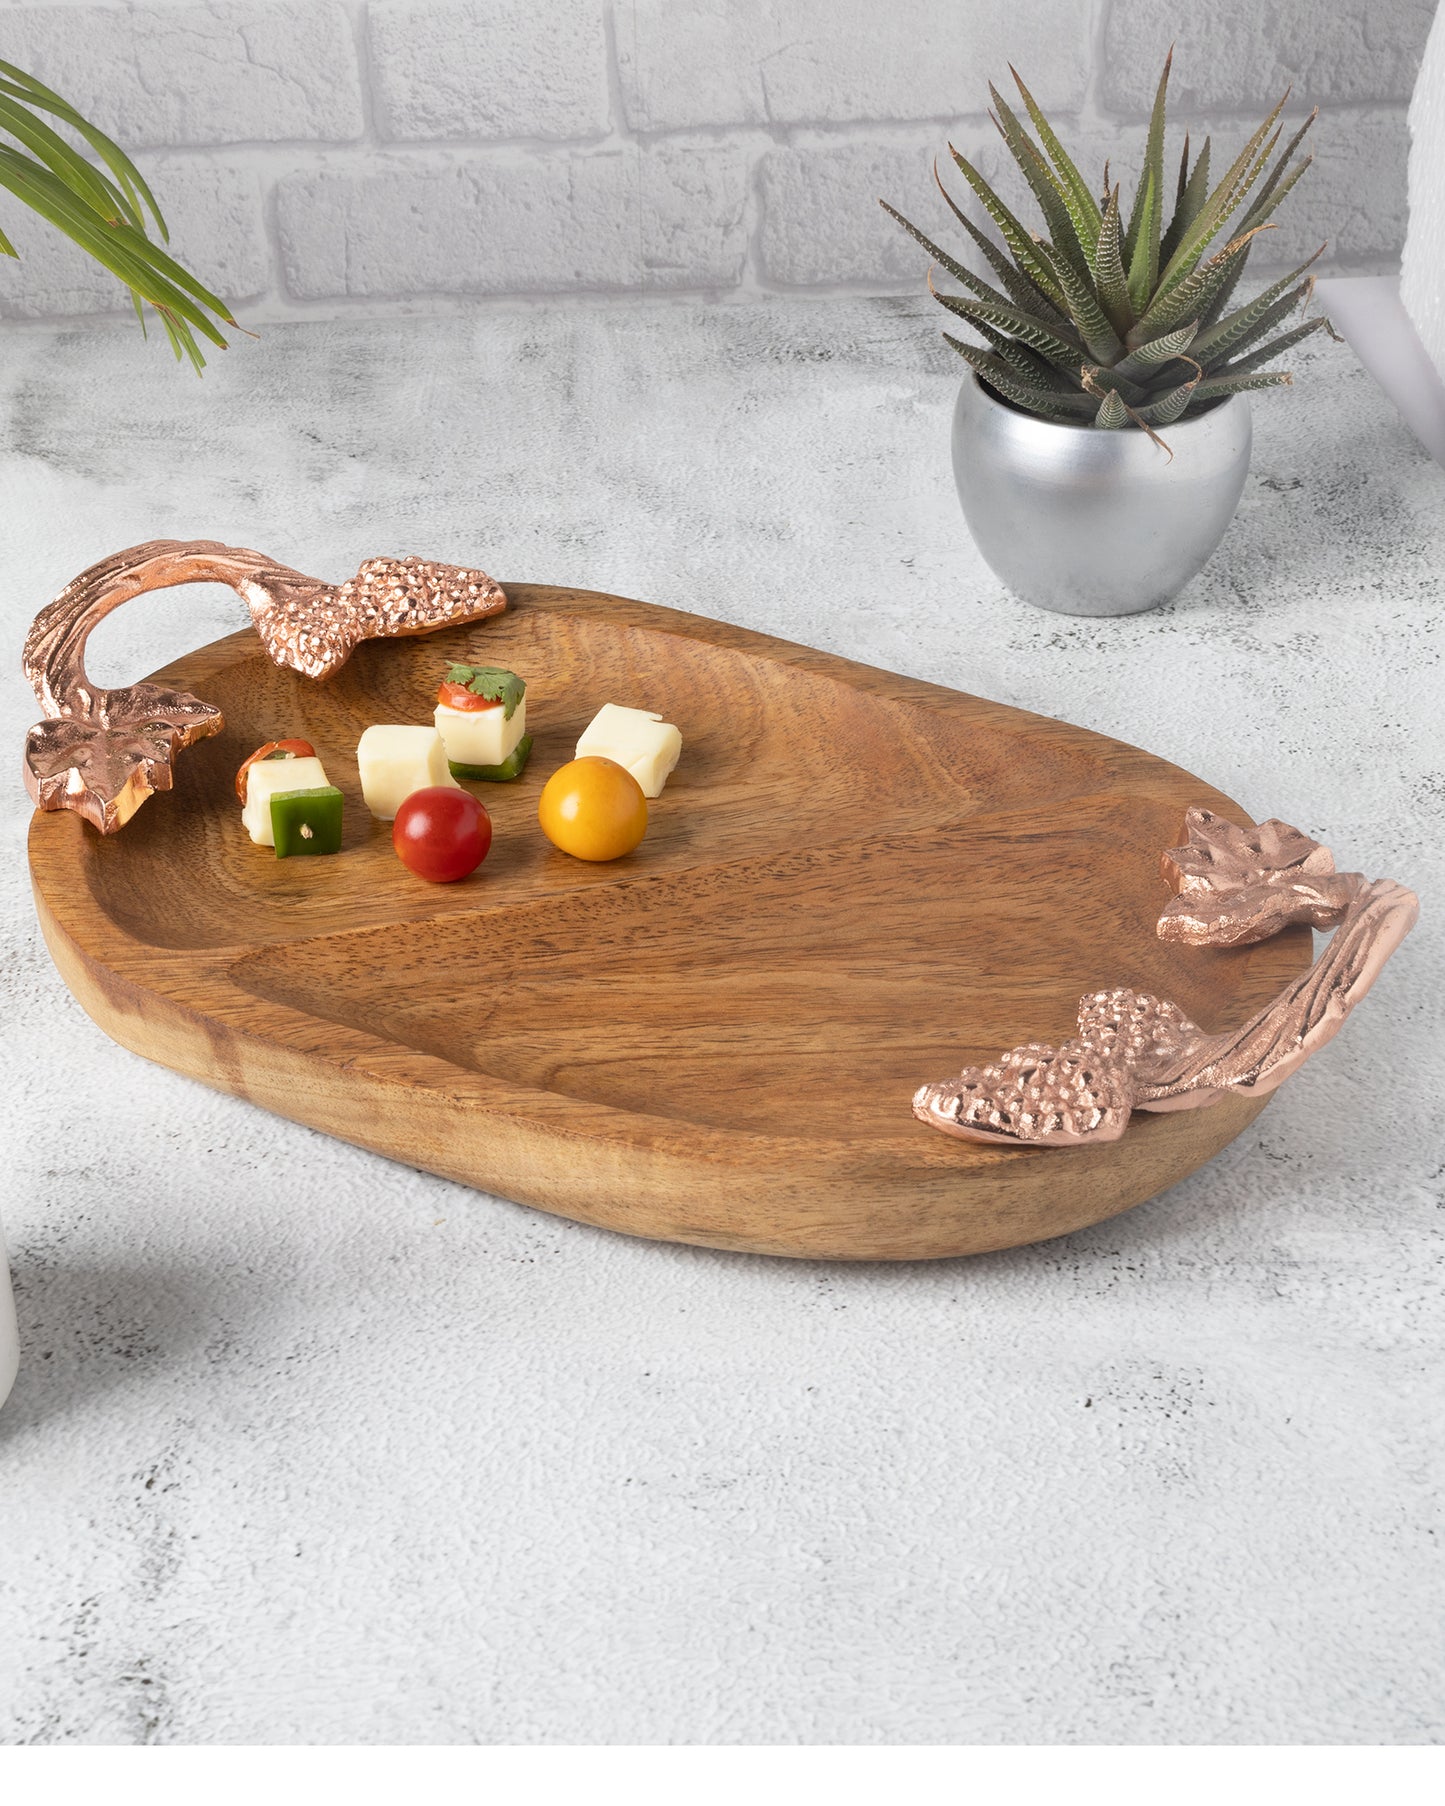 Natural Wooden Oval compartment tray with leaf handle, serving tray, snacks and fruits